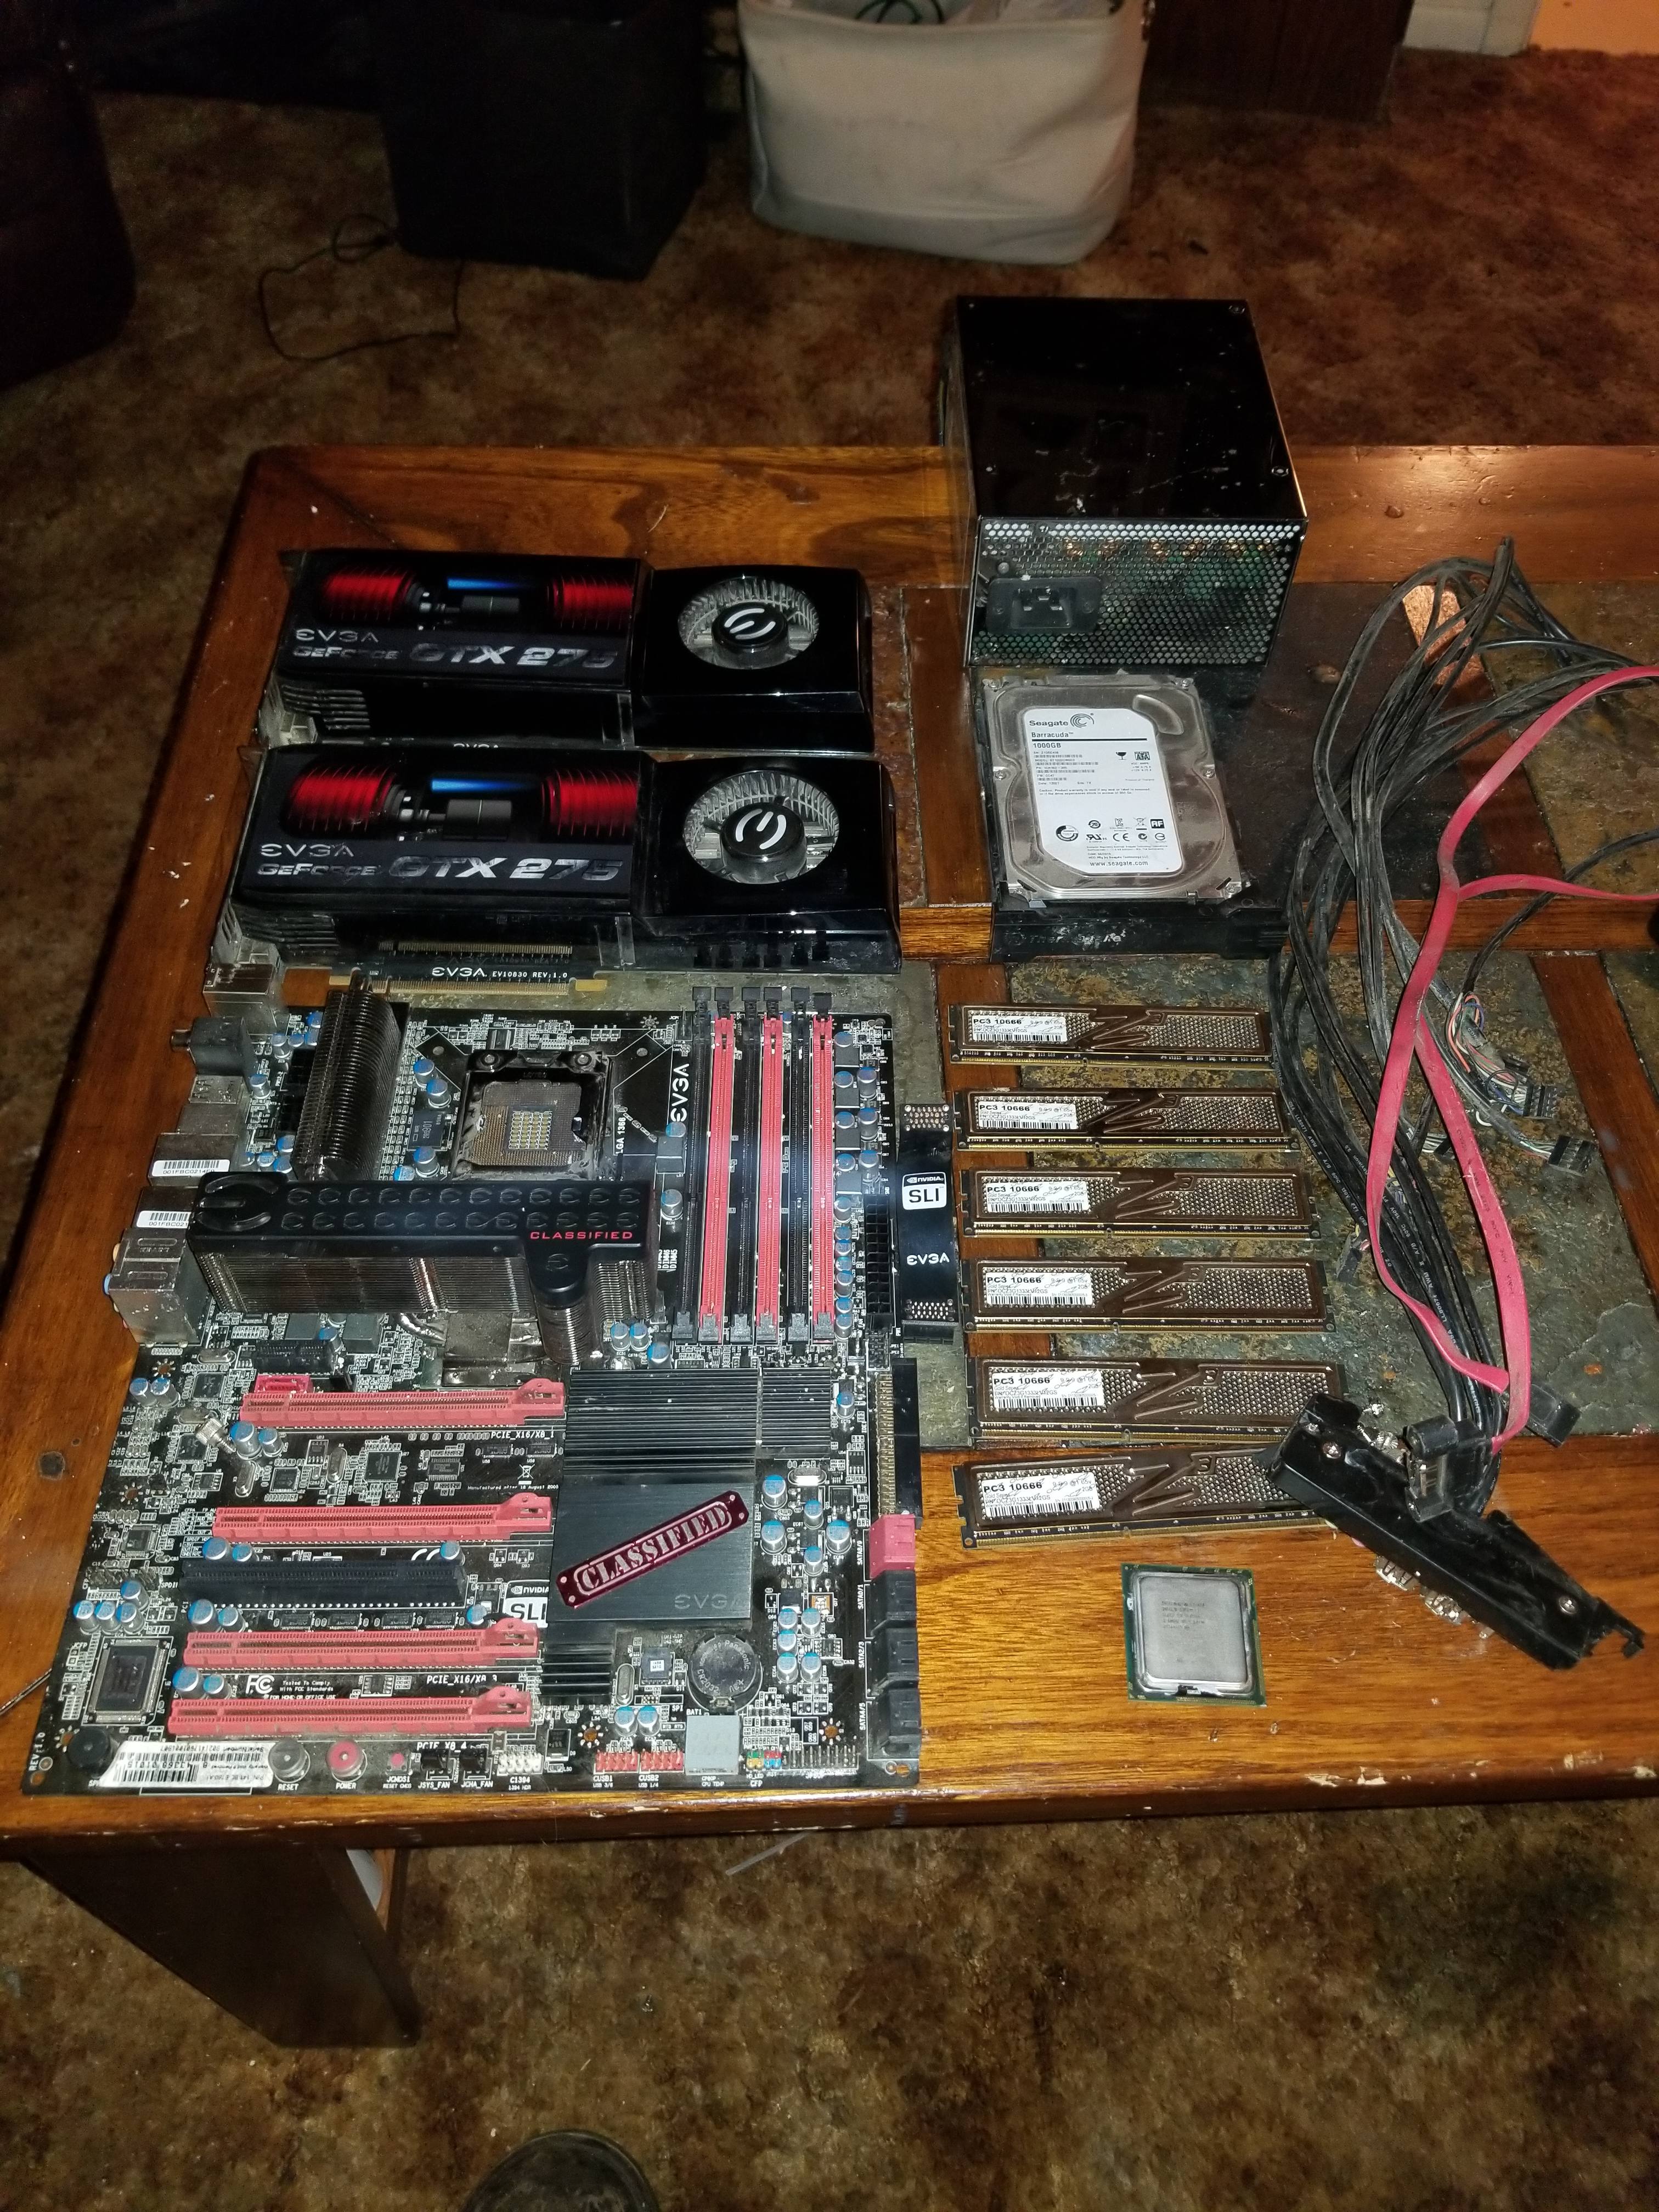 Any love for this Dumpster find? - CPUs, Motherboards, and Memory